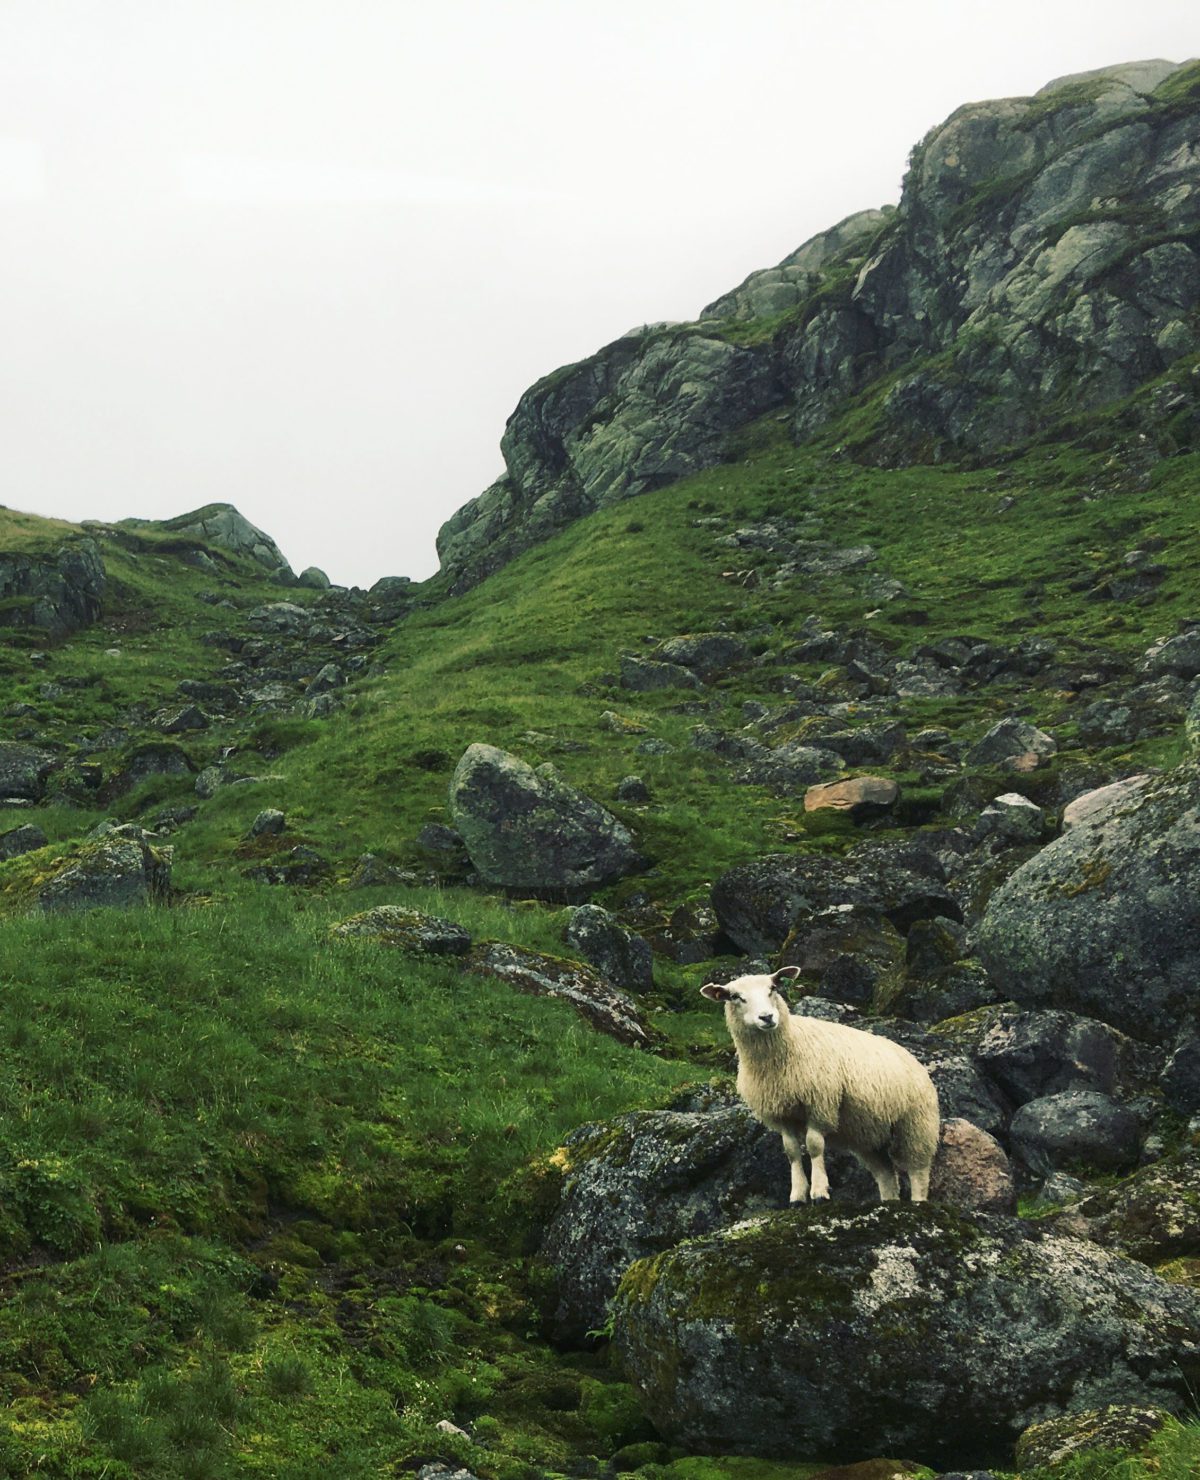 A sheep in the mountains.